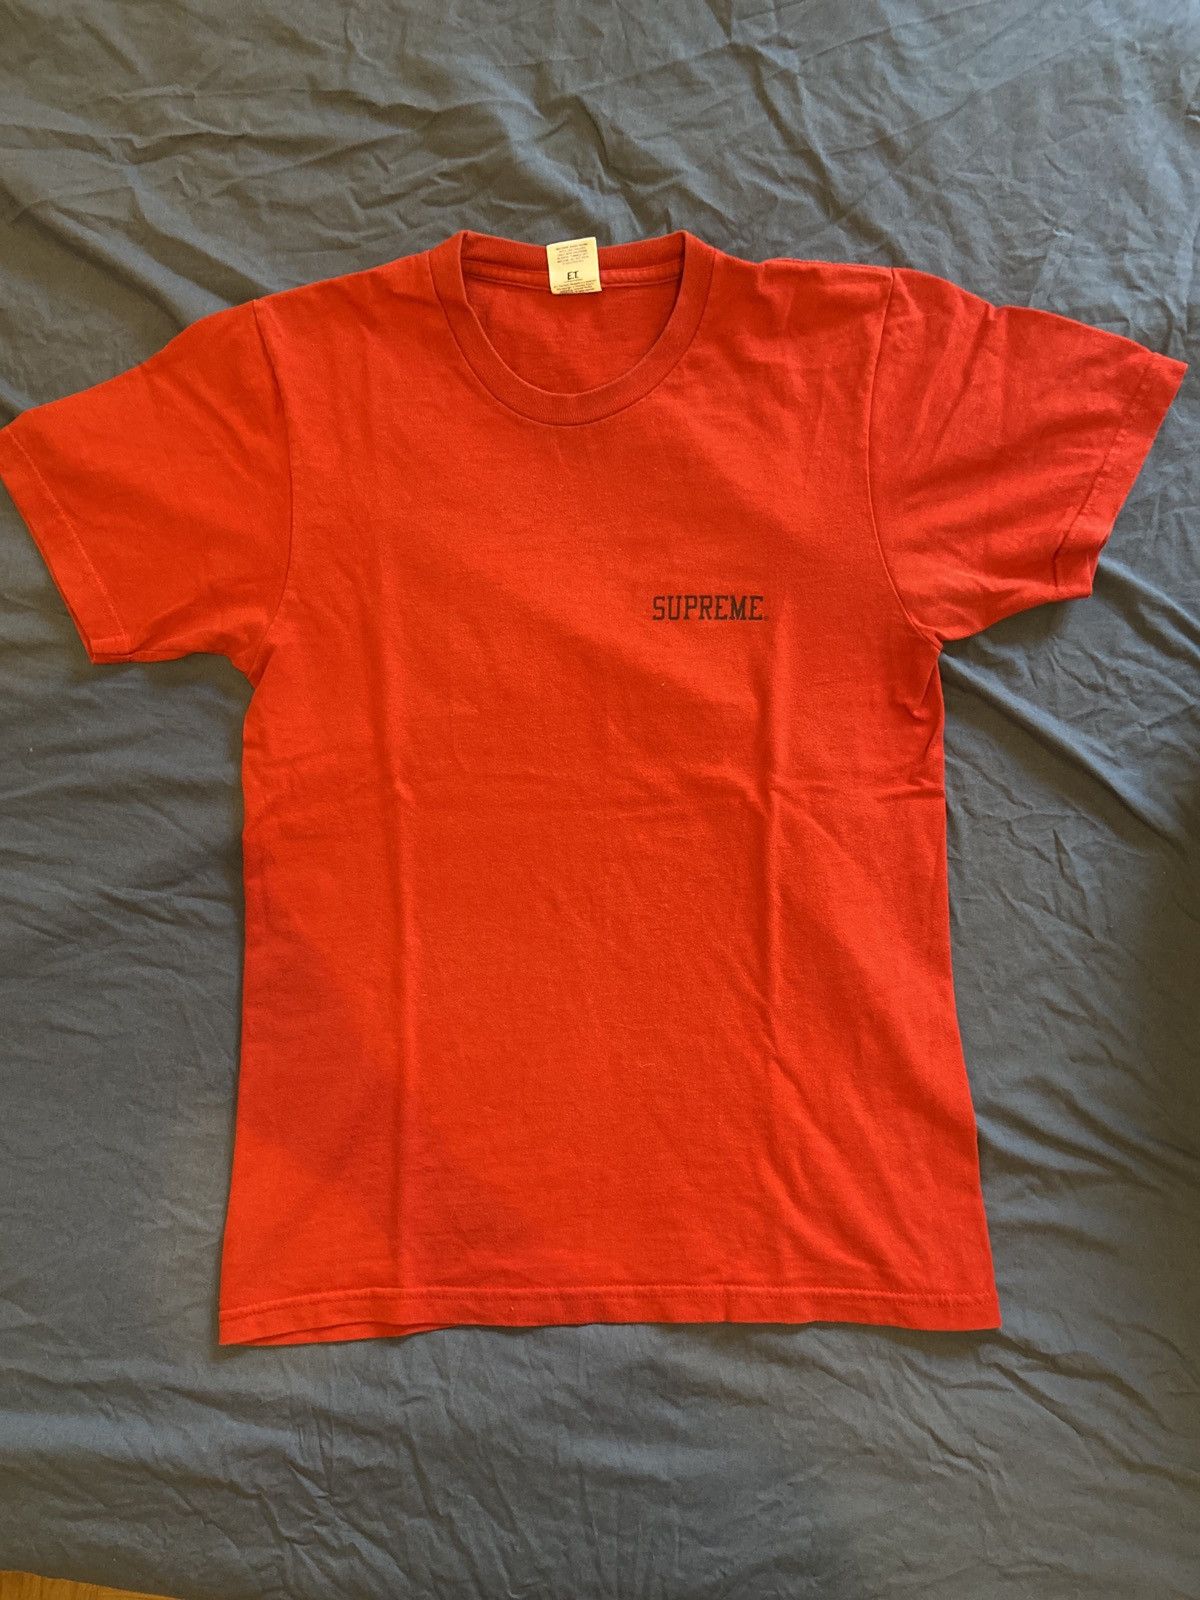 Supreme Supreme ET t-shirt red size S VG condition FW15 Size US S / EU 44-46 / 1 - 1 Preview